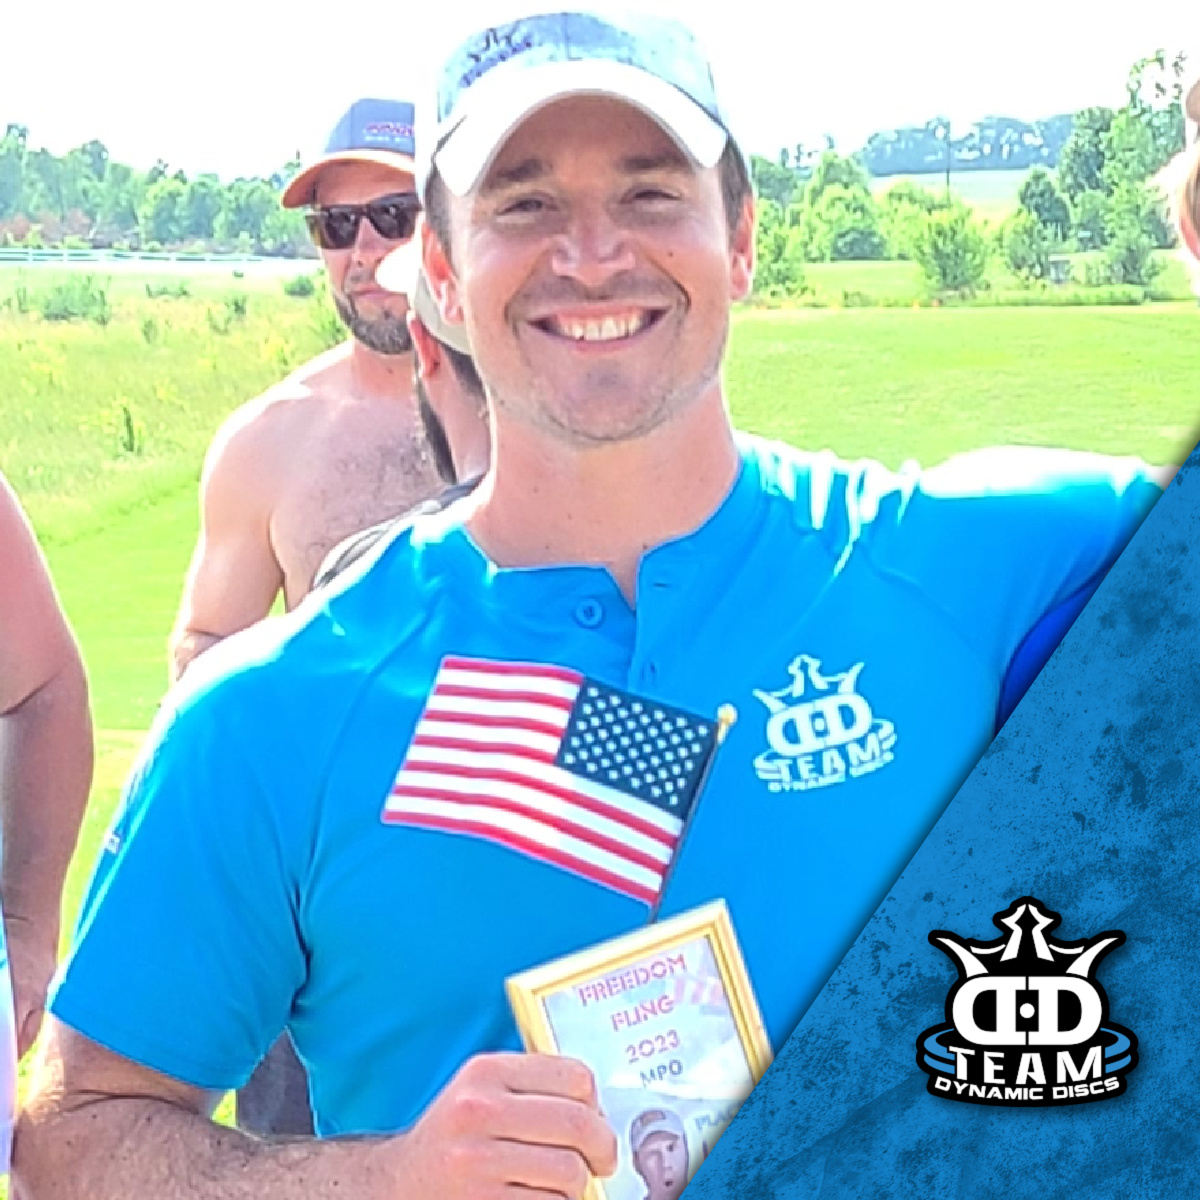 Join us in congratulating Kyle Giovannini on his MPO win at 'RR#3 Freedom Fling' in Lowell, Indiana. Way to work, Kyle! 🏆 #bedynamic #teamdynamicdiscs #winningwednesday #discgolf